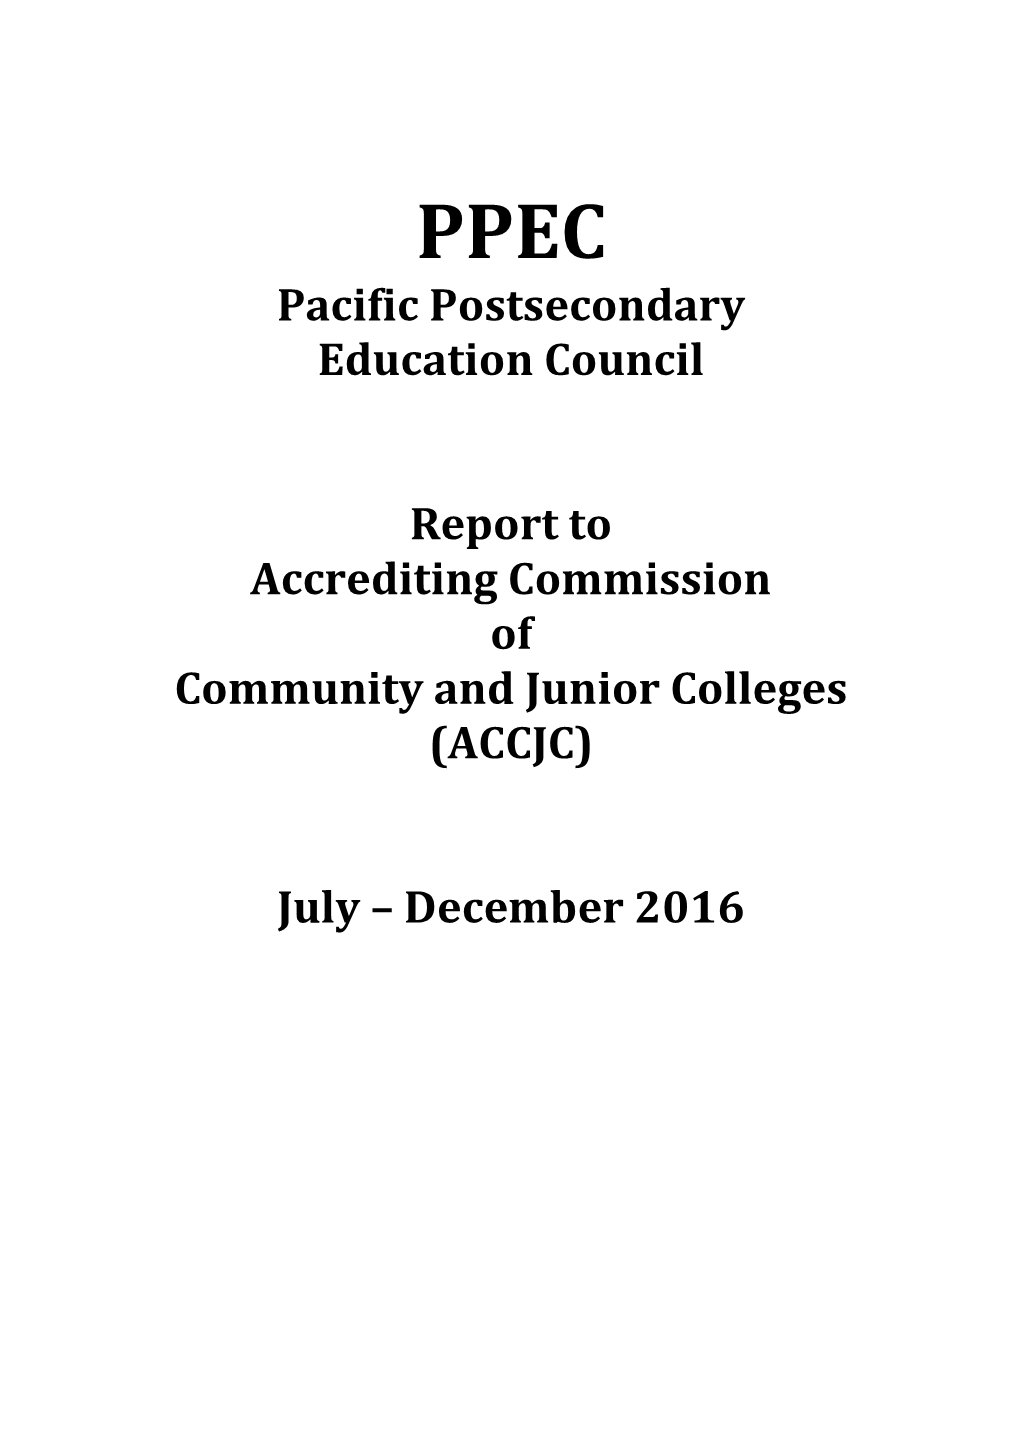 Pacific Postsecondary Education Council Report to Accrediting